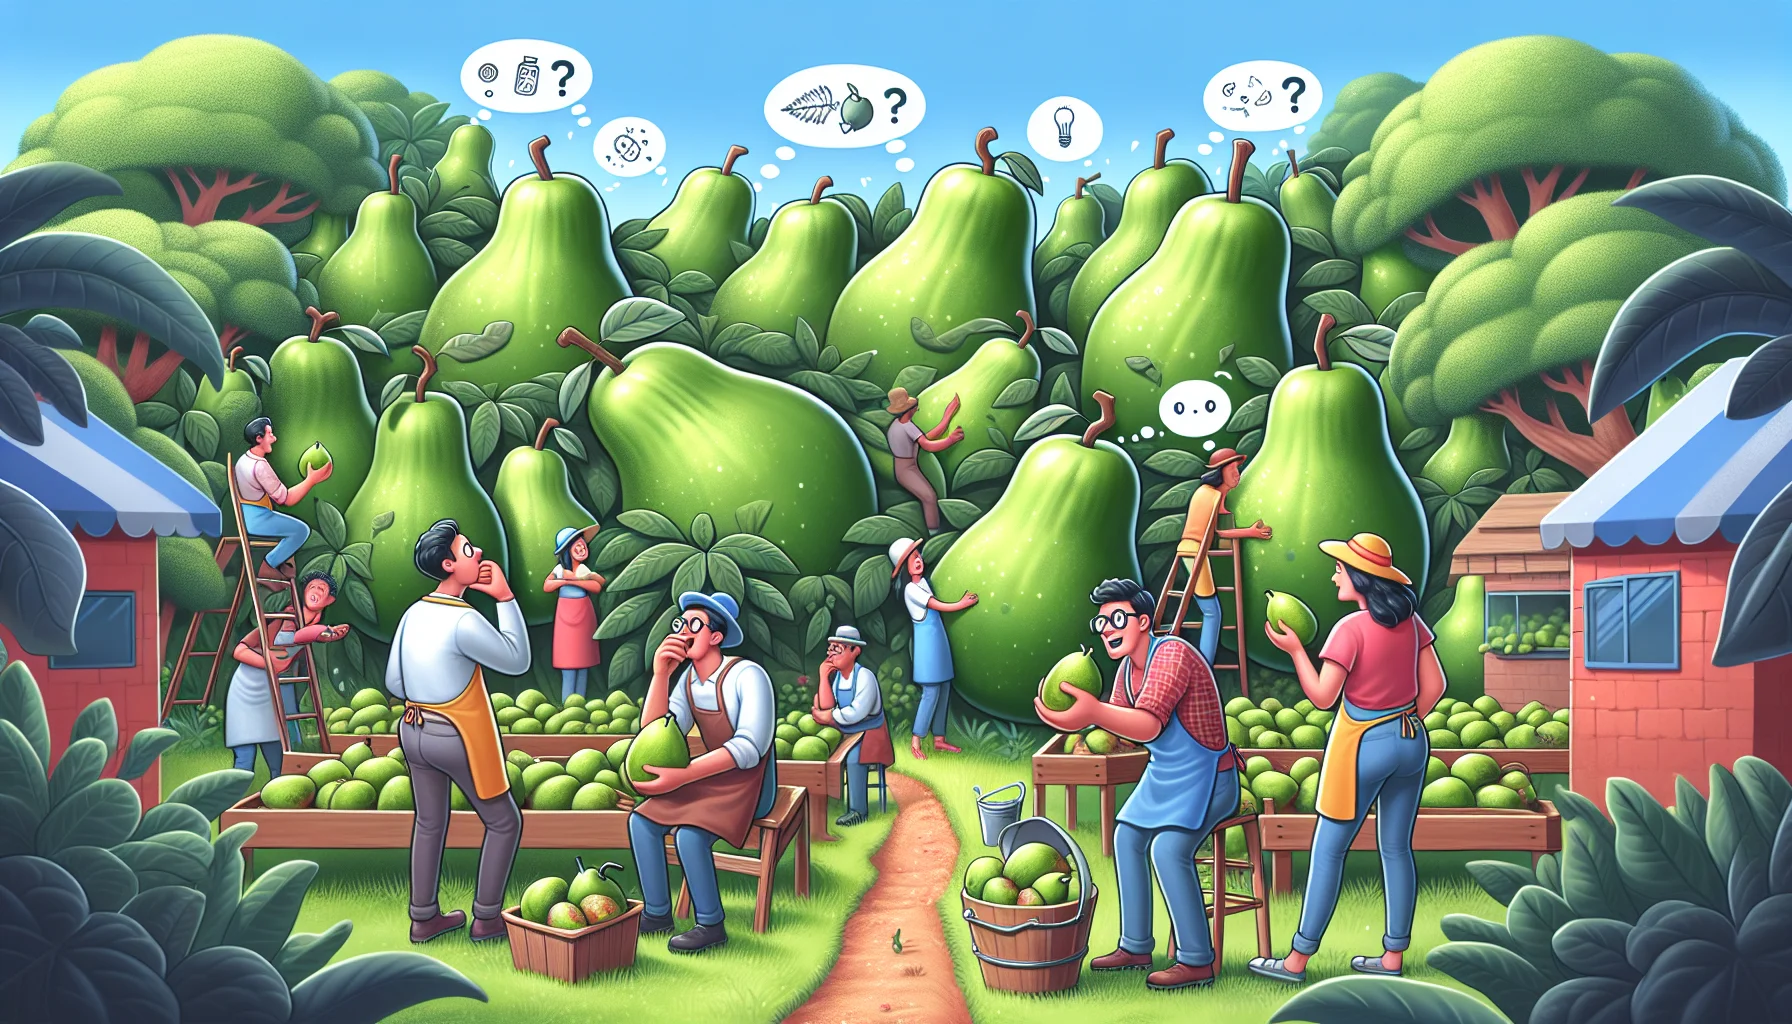 Create an amusing scene highlighting the nutritional benefits of the paw paw fruit. Illustrate a garden filled with paw paw trees, laden with this plump, green fruit. Show a group of people of varying genders and descents engaging in gardening activities, each person holding a paw paw fruit and looking at it with awe and joy. Through these people's expressions and reactions, convey the idea that the paw paw fruit is not just delicious, but surprisingly nutritious. Integrate elements in the image that alludes to the various nutrition benefits like its richness in vitamins and minerals, perhaps through signs, labels, or thought bubbles.